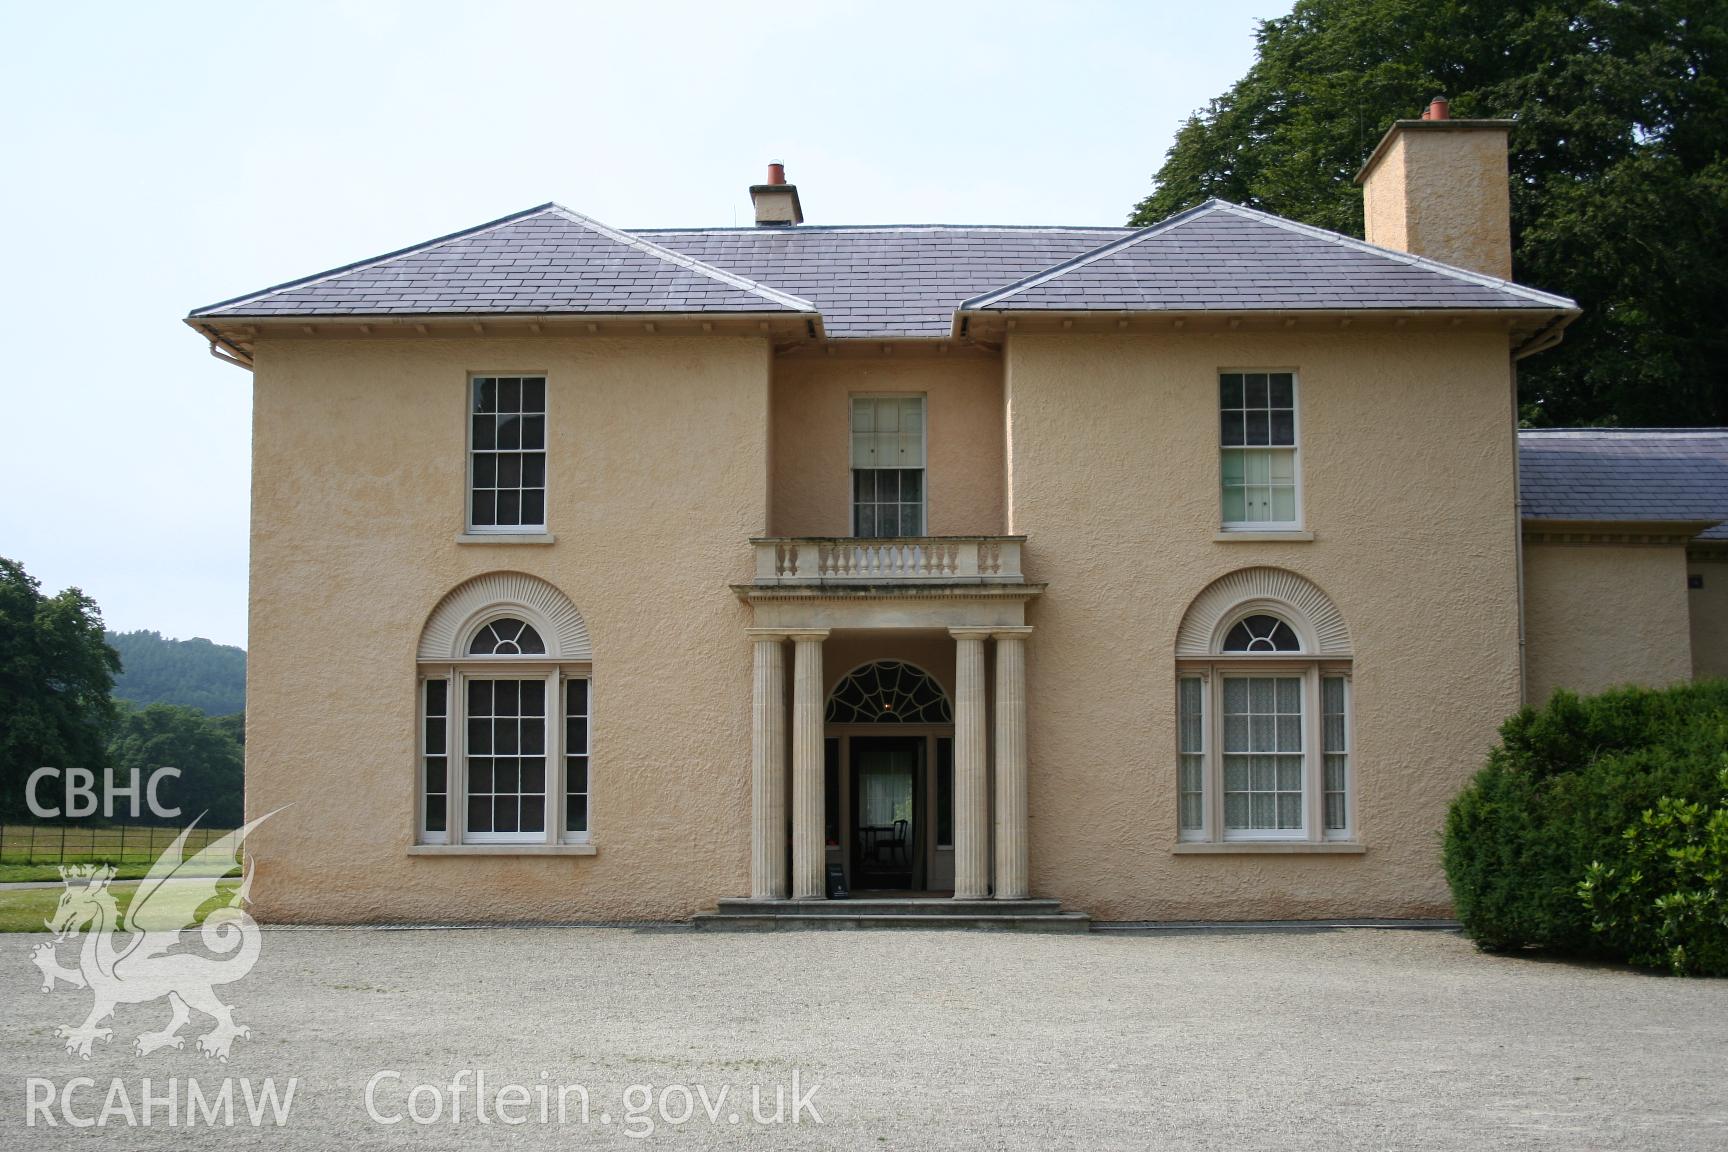 View of Llanaeron House from the southeast, taken by Brian Malaws on 01 July 2006.